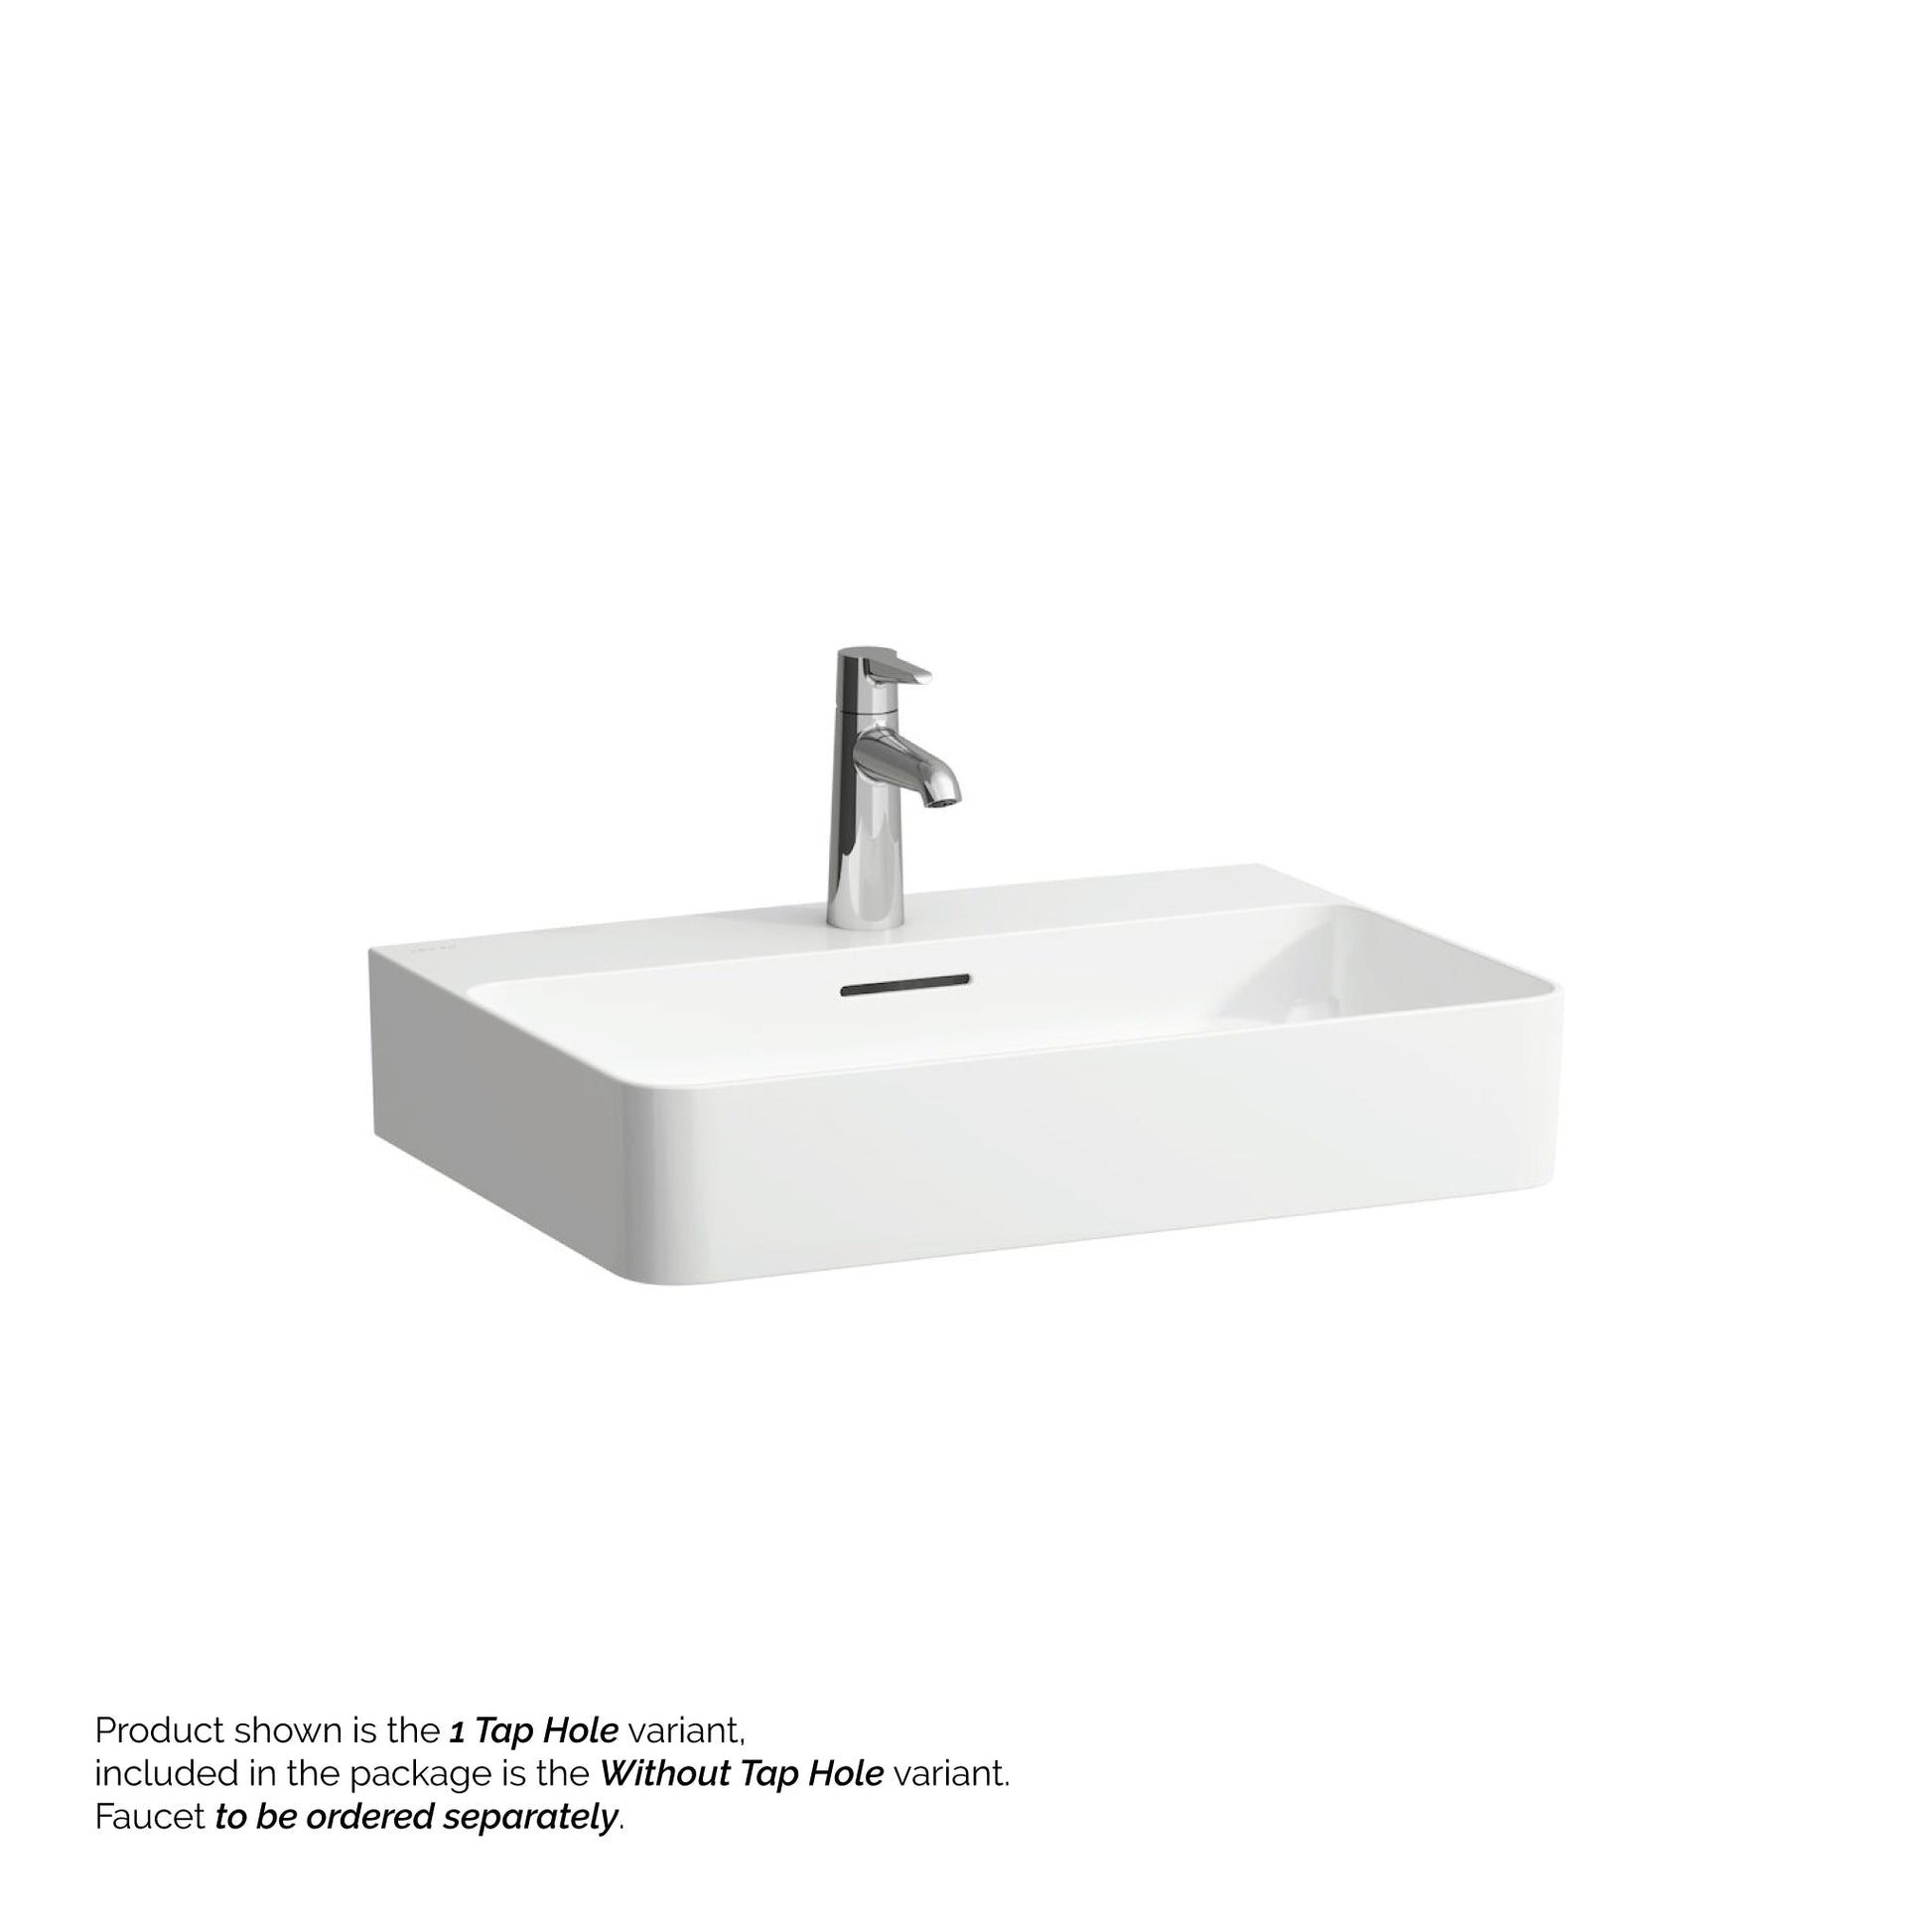 Laufen Val 24" x 17" White Ceramic Wall-Mounted Bathroom Sink Without Faucet Hole